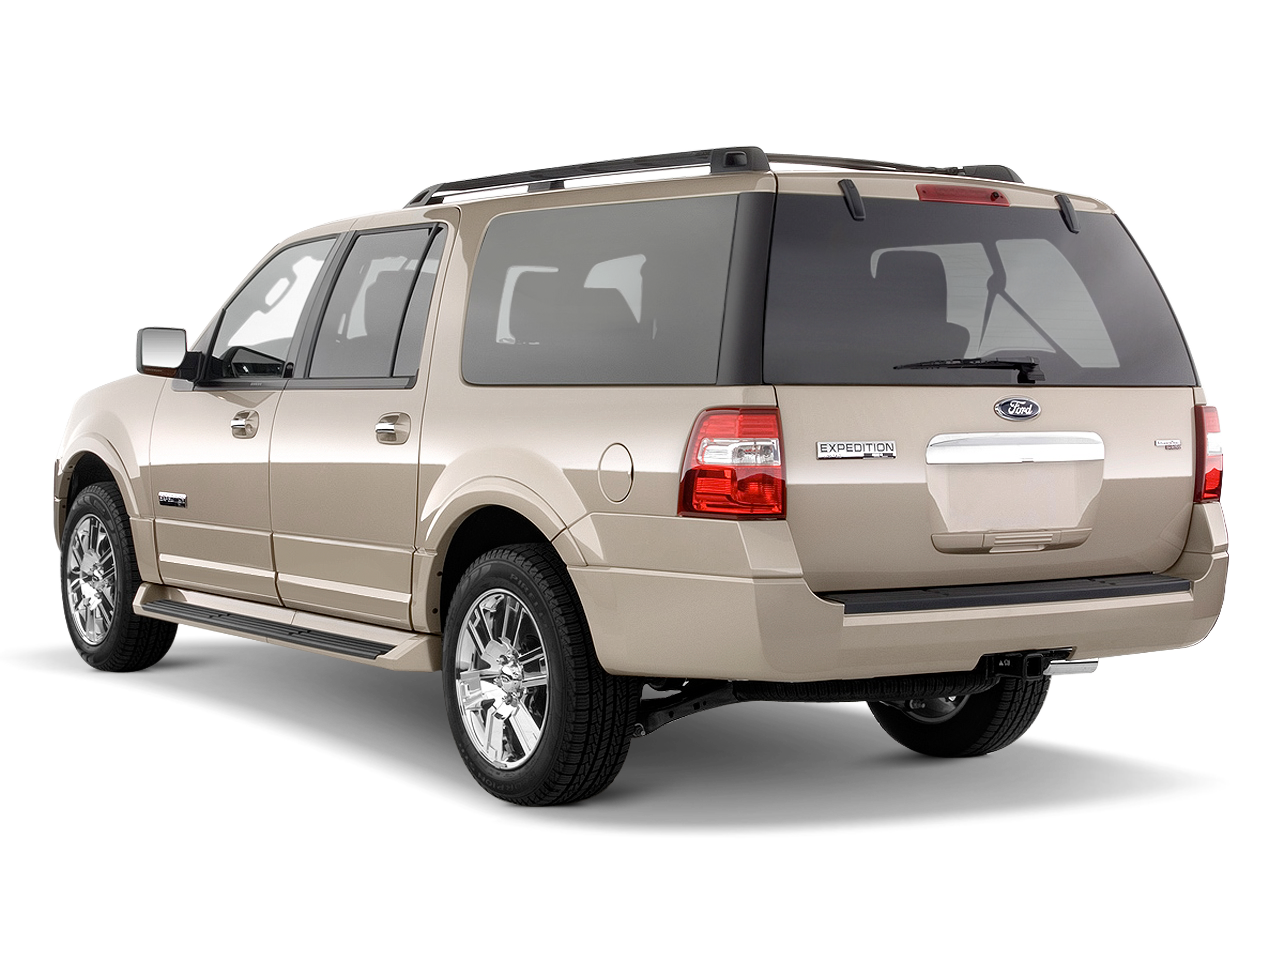 Ford Expedition King Ranch EL 2013 - International Price & Overview